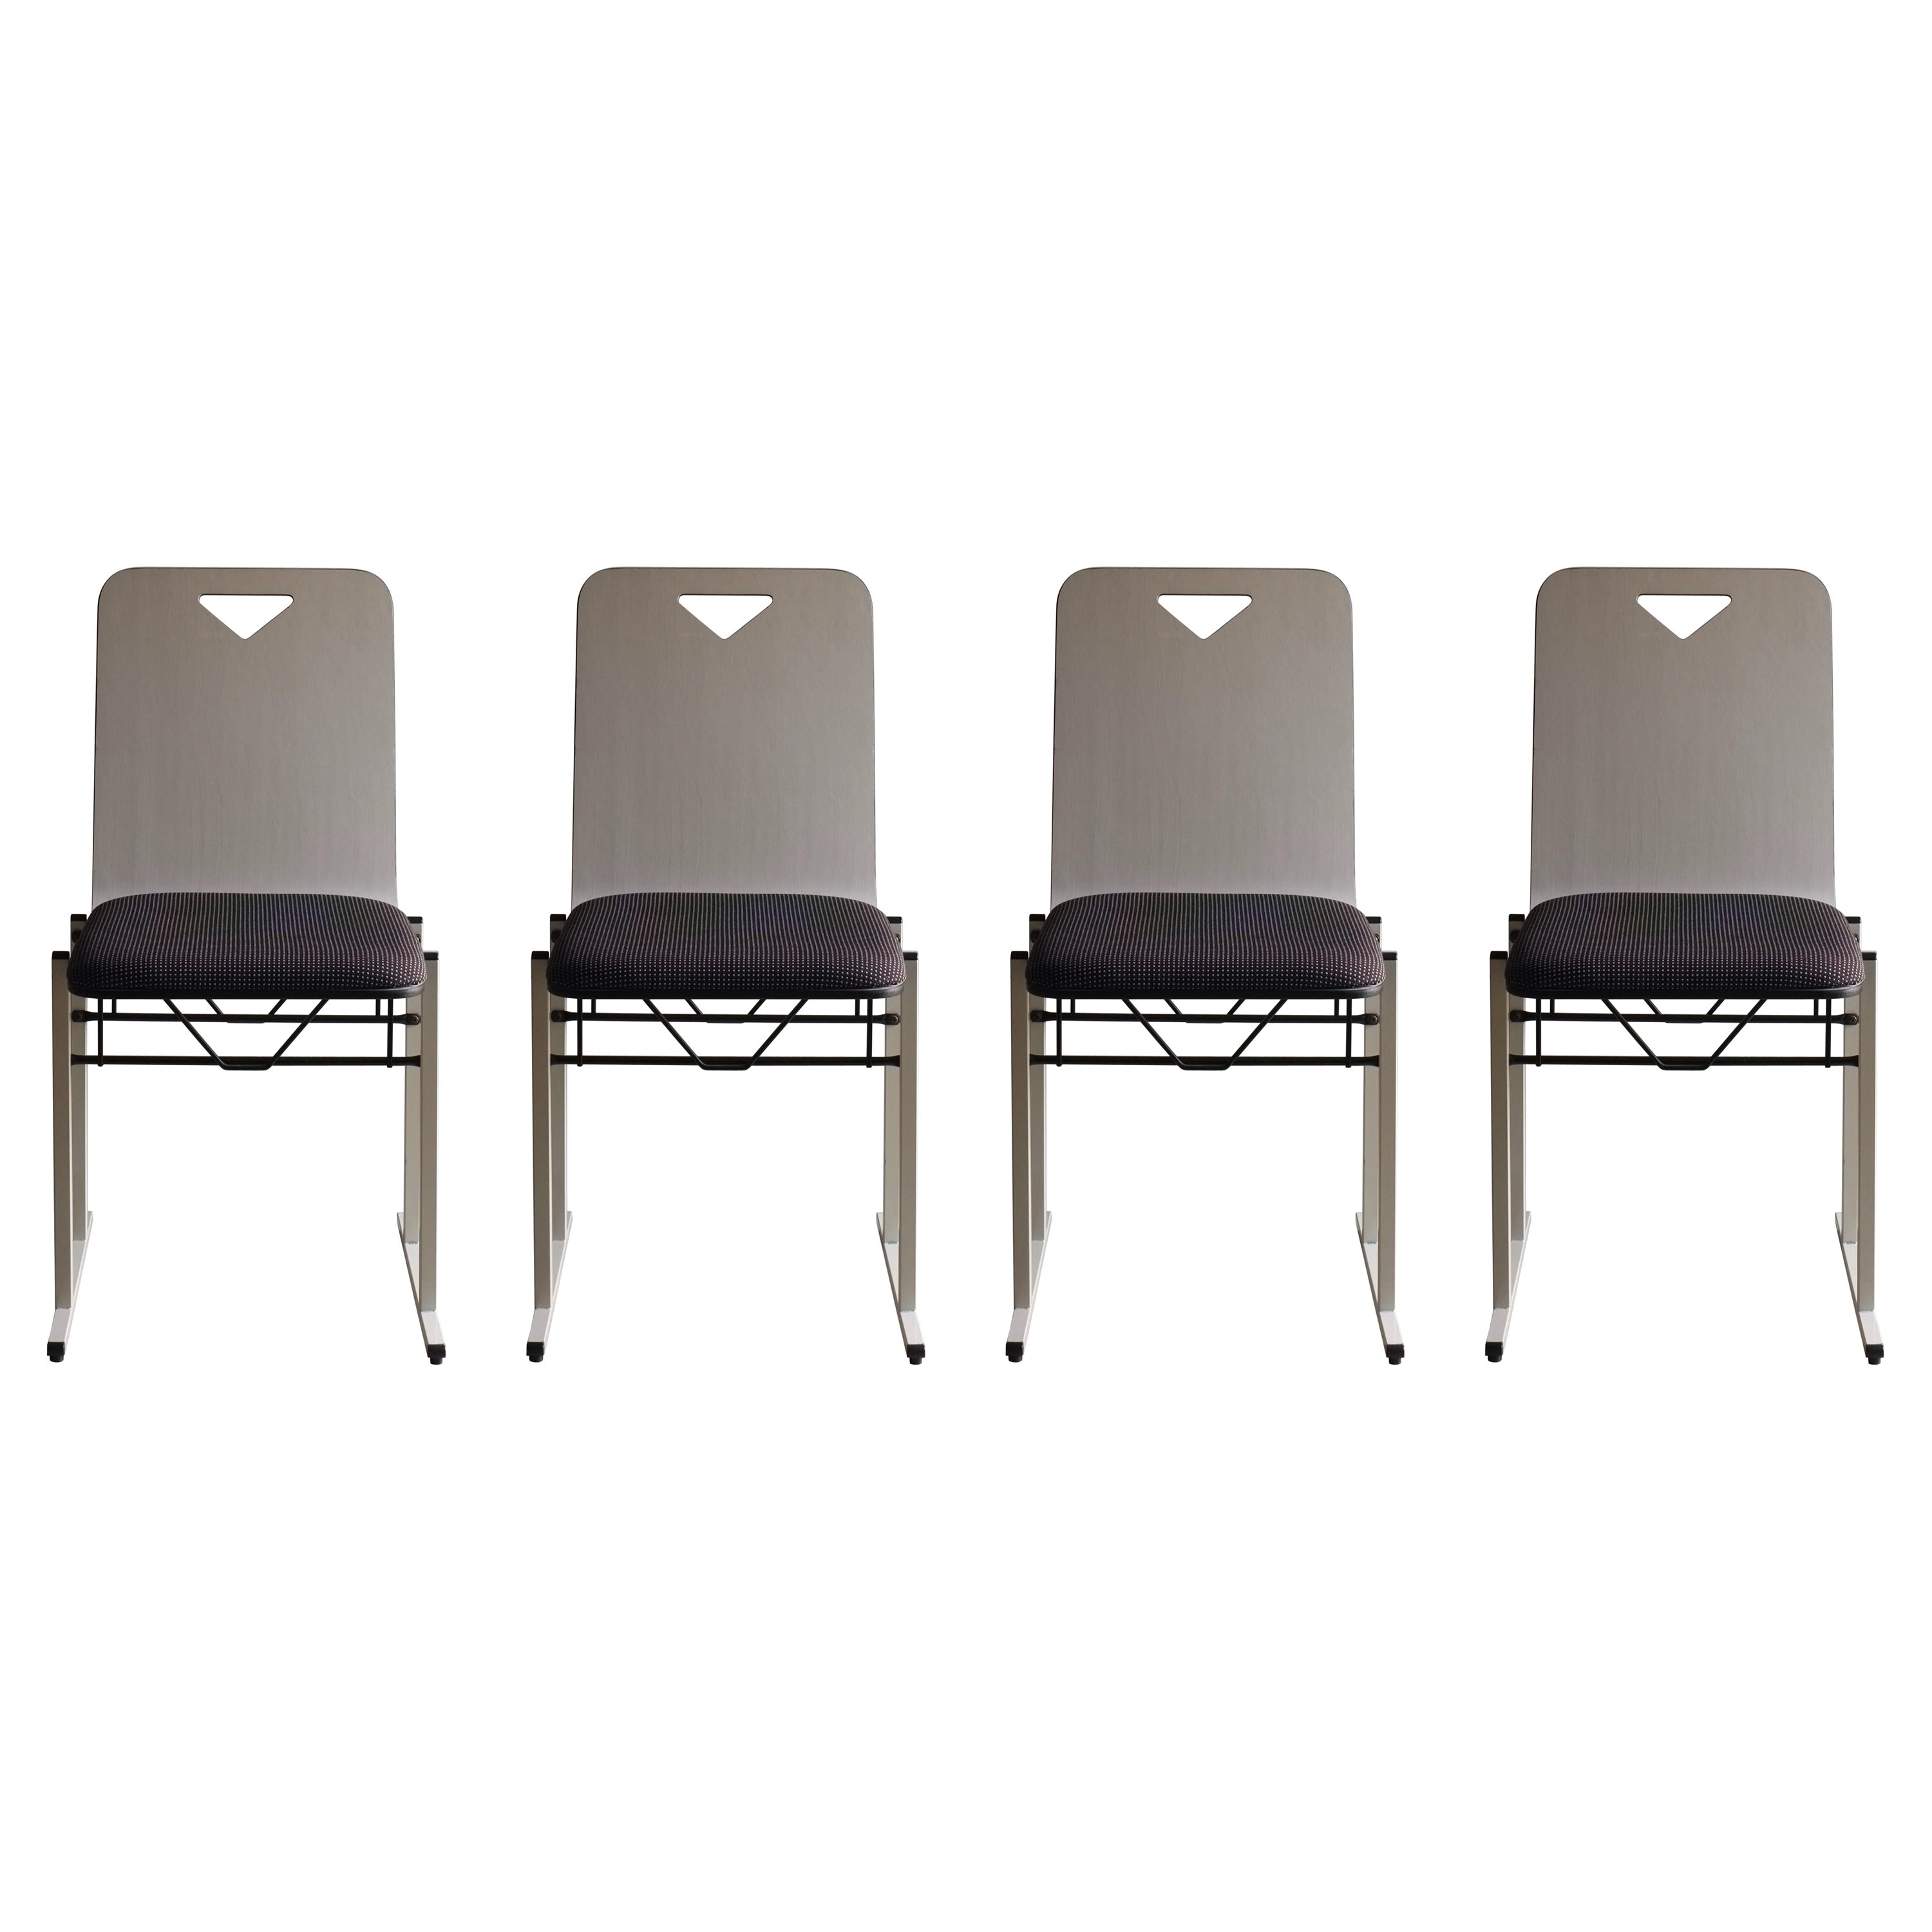 4 White Metal Chairs By Yrjö Kukkapuro For Avarte, Finland 1980s For Sale